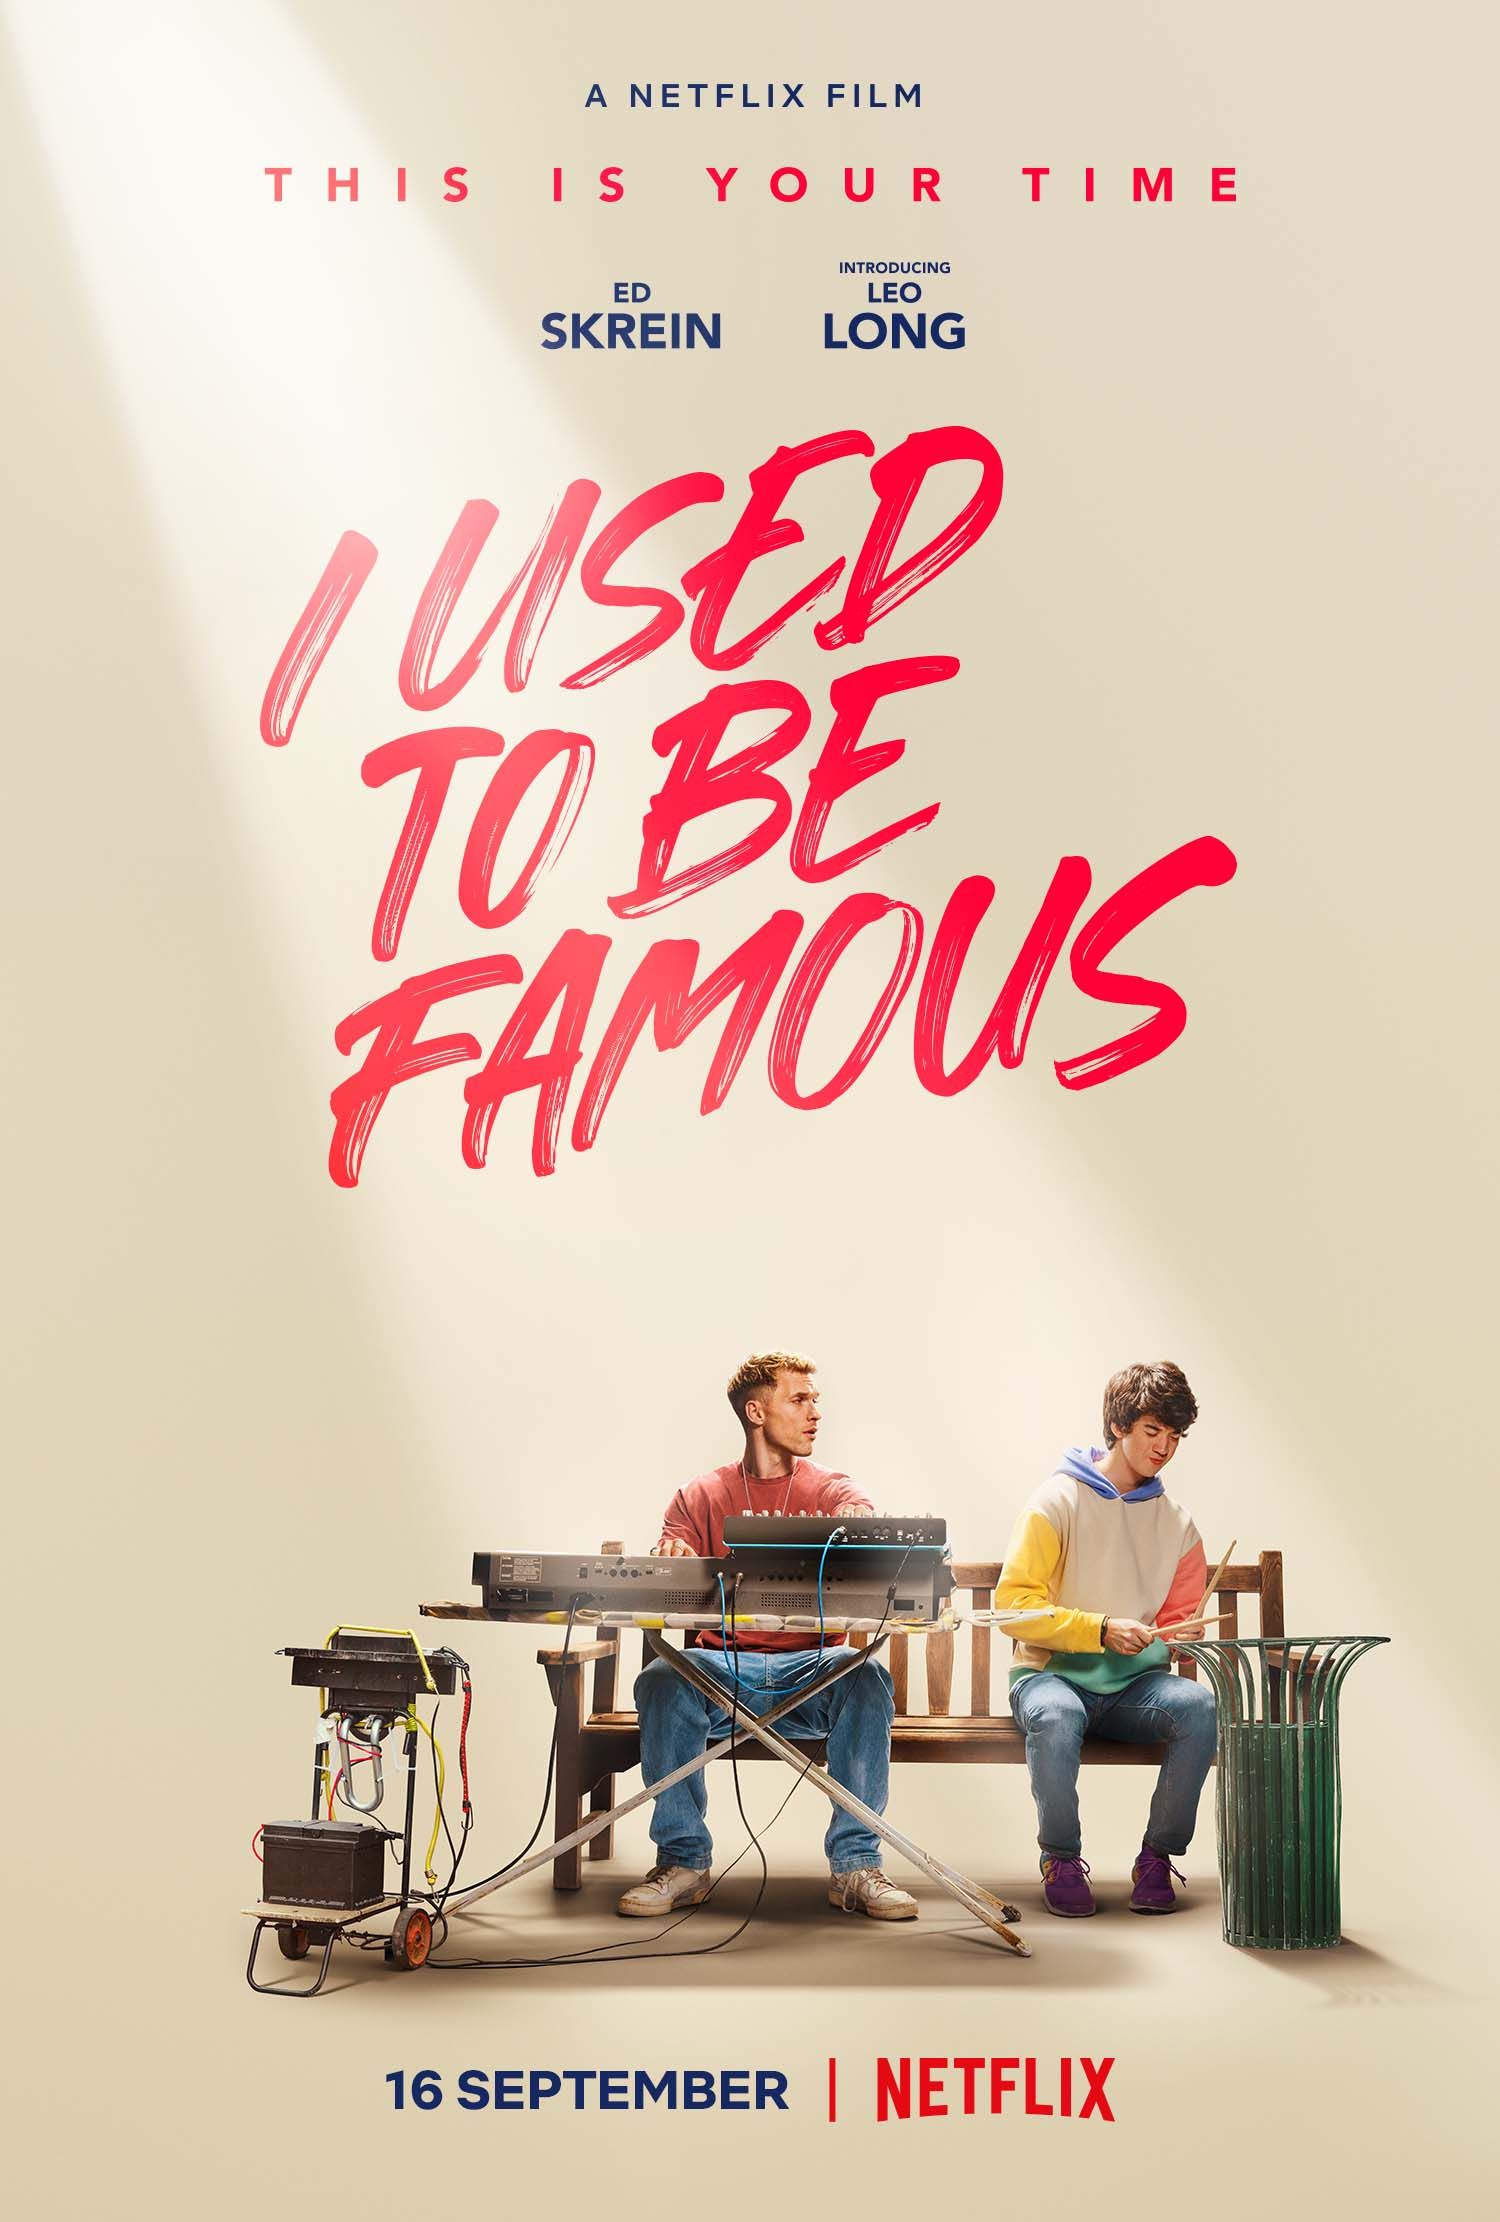 I Used to Be Famous logo